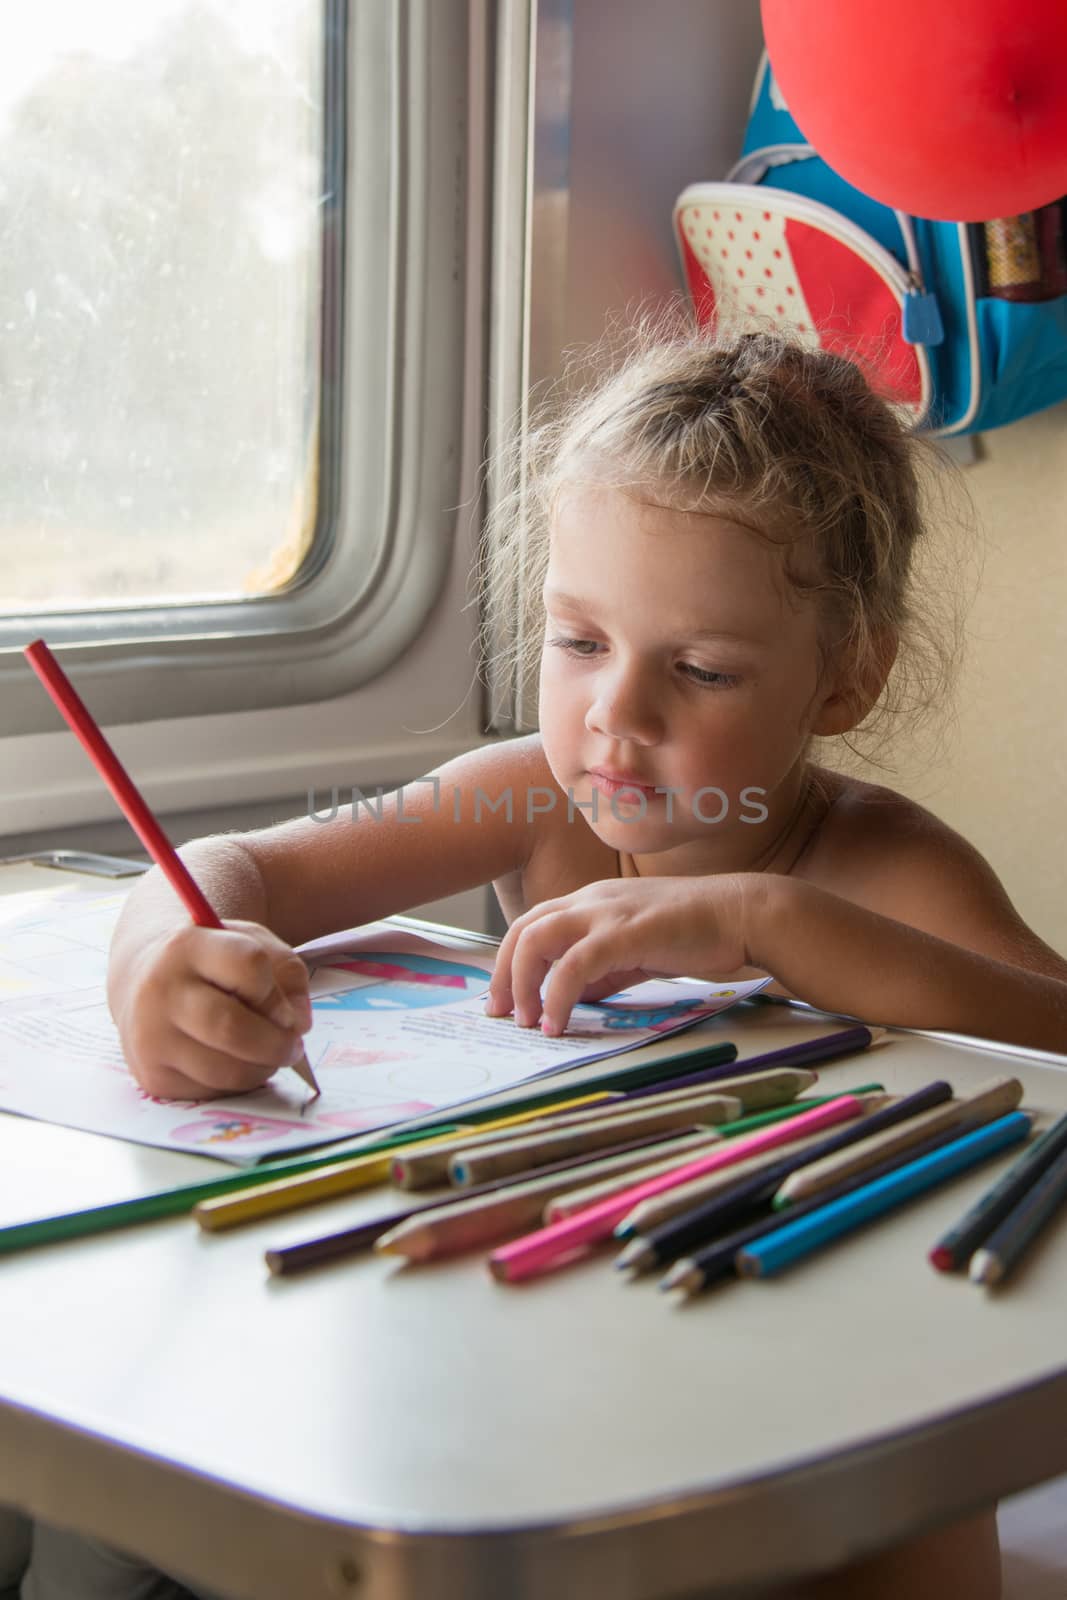 Four-year girl drawing with pencils at a table in a train by Madhourse